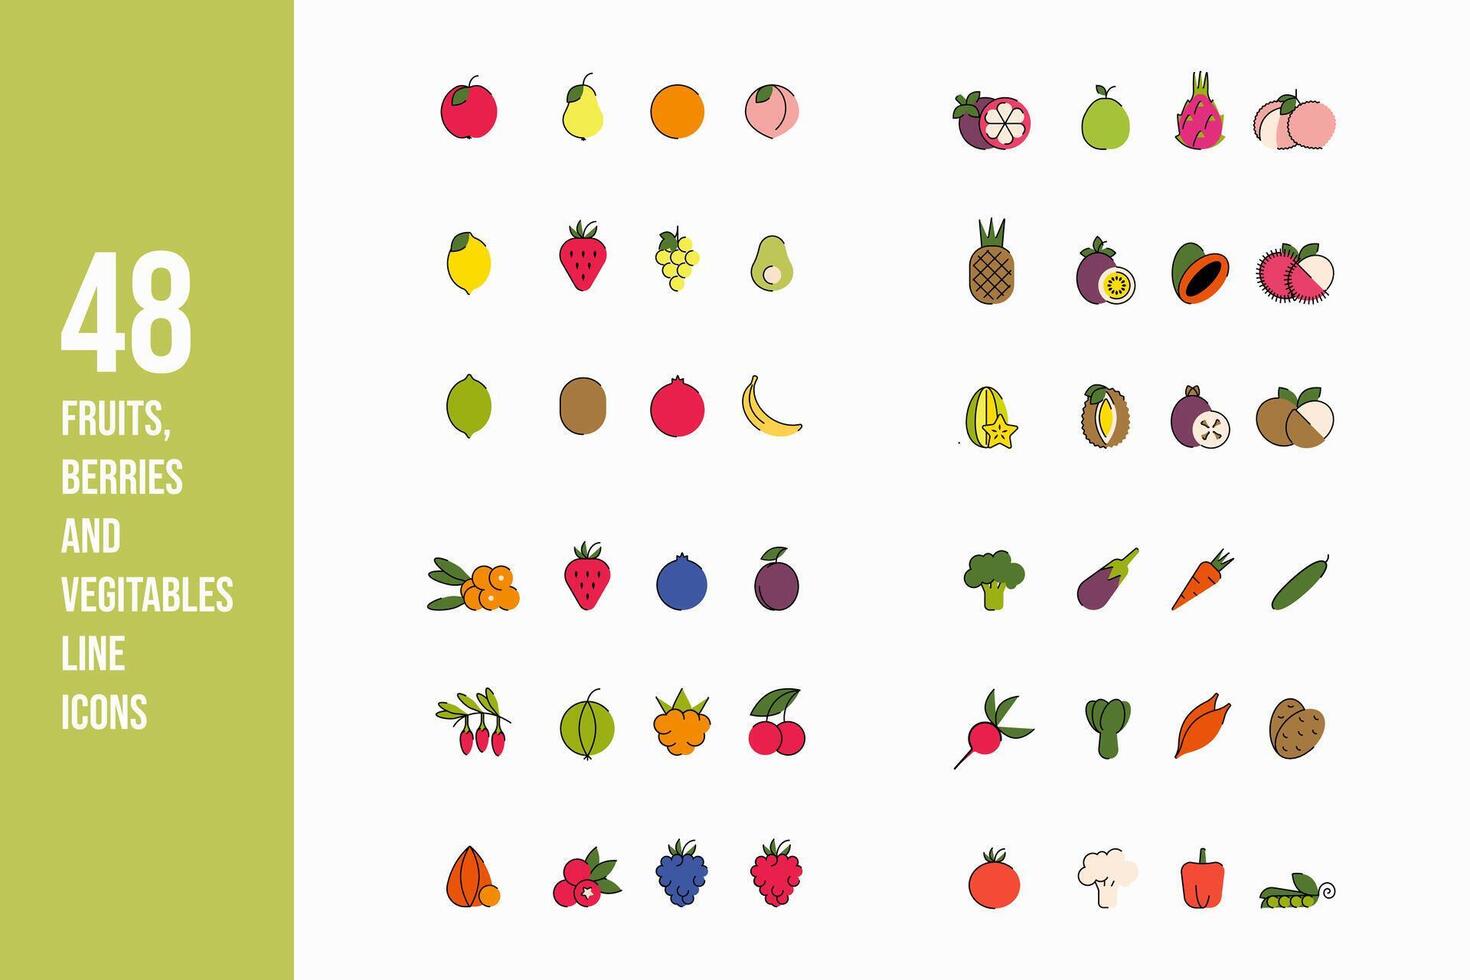 Editable stroke thin line food icons for web and app. Fruits, berries and vegetables icon set. Flat simple colorful food vector illustrations.